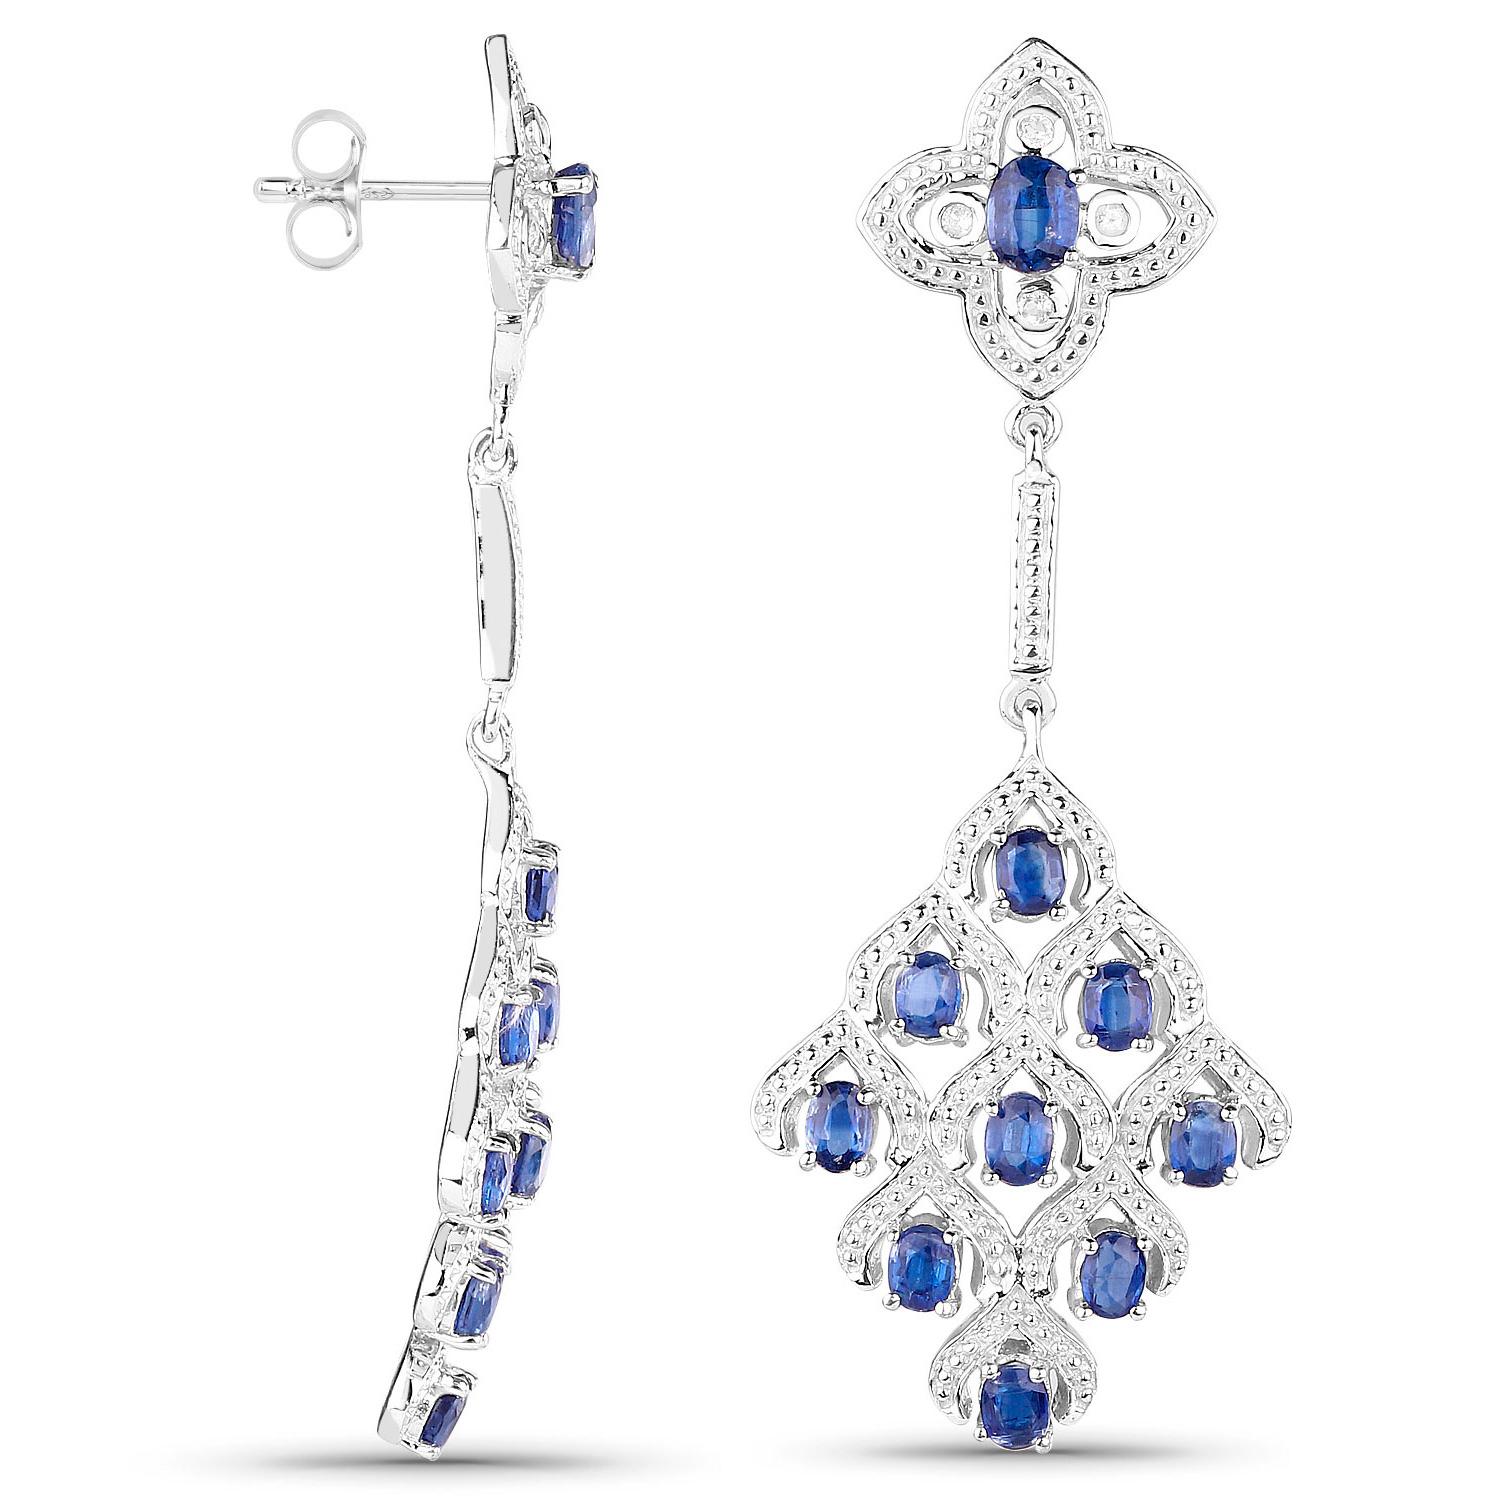 Oval Cut Kyanite Chandelier Earrings With White Topaz 5.6 Carats Rhodium Plated Silver For Sale